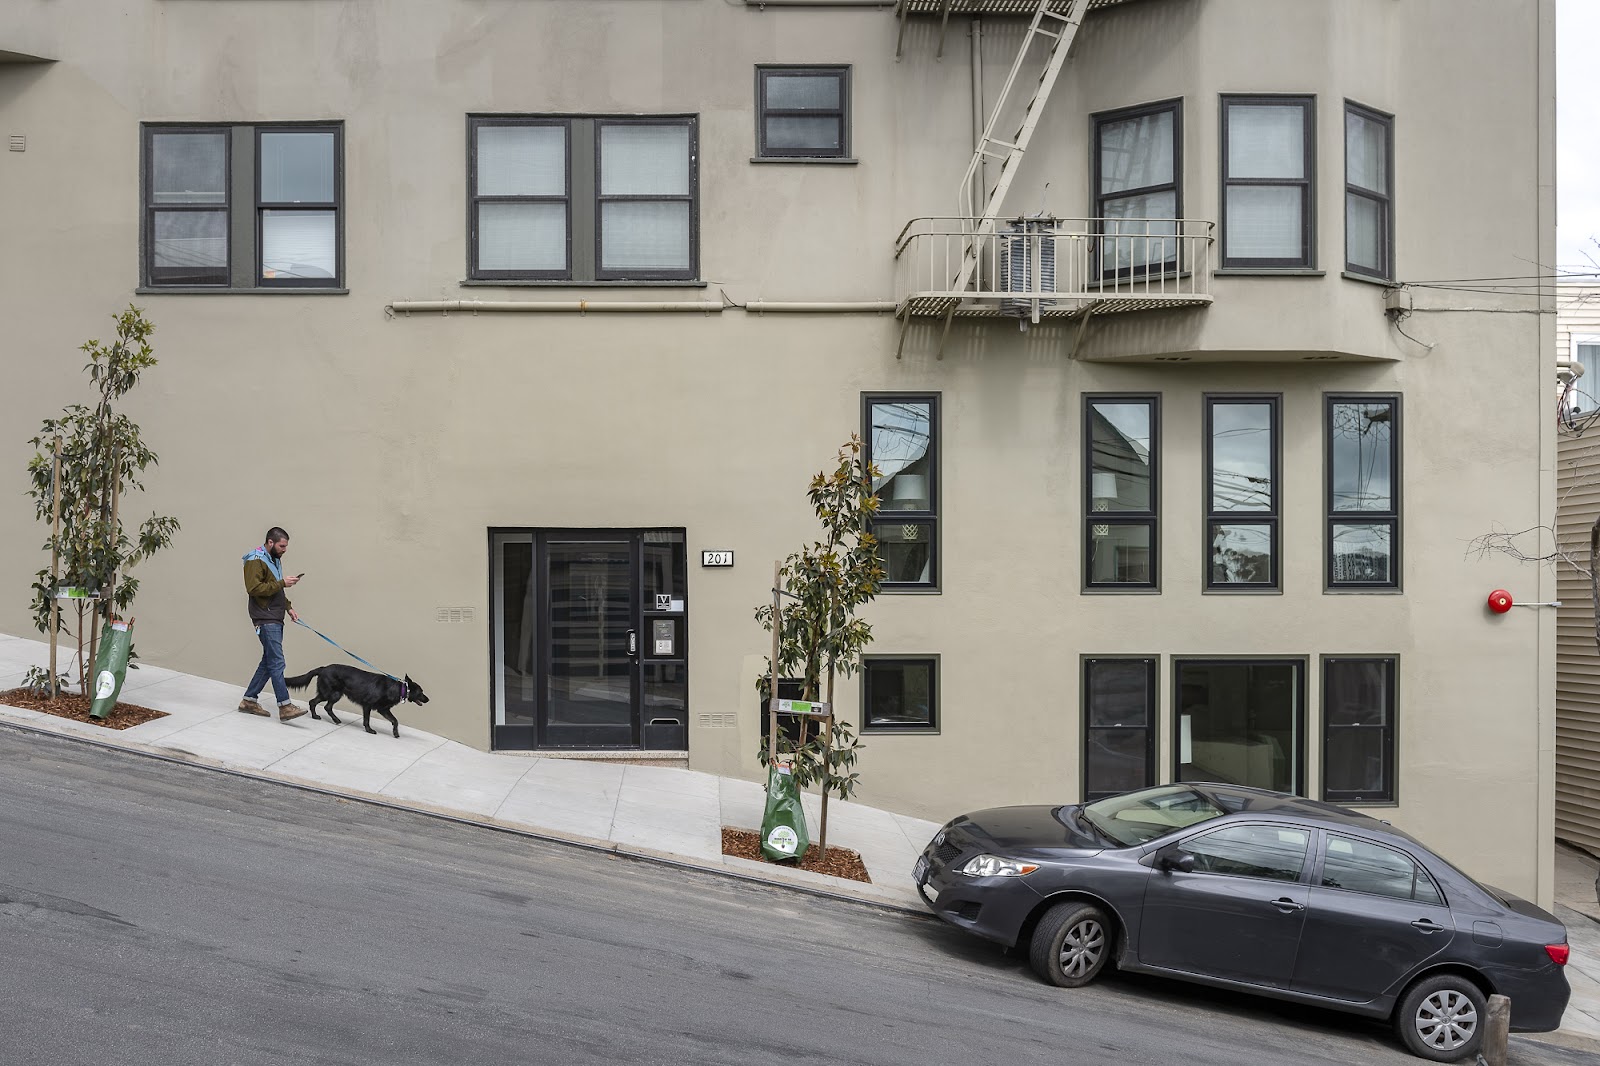 accessory dwelling unit added to multi-family building in San Francisco